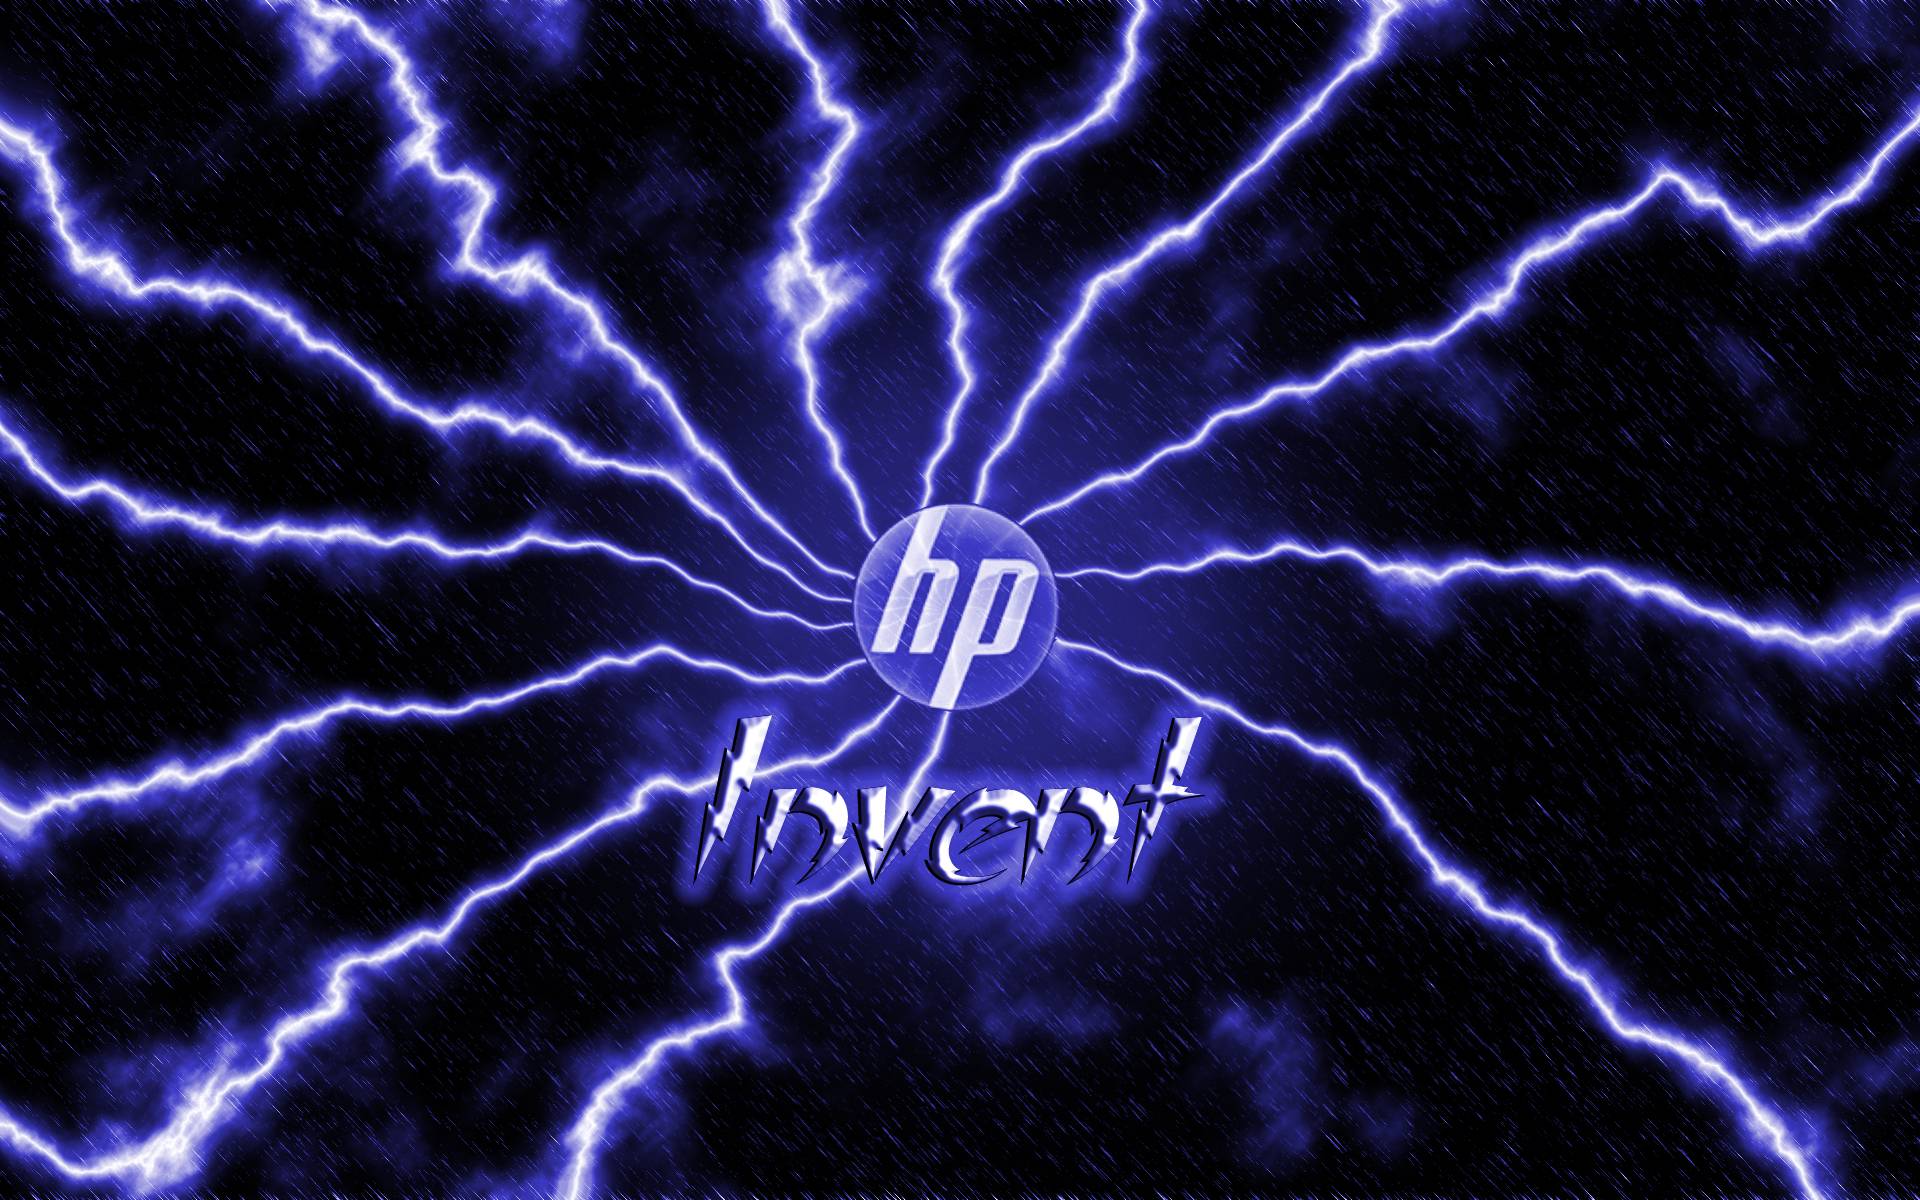 HP invent wallpapers by Derrabe